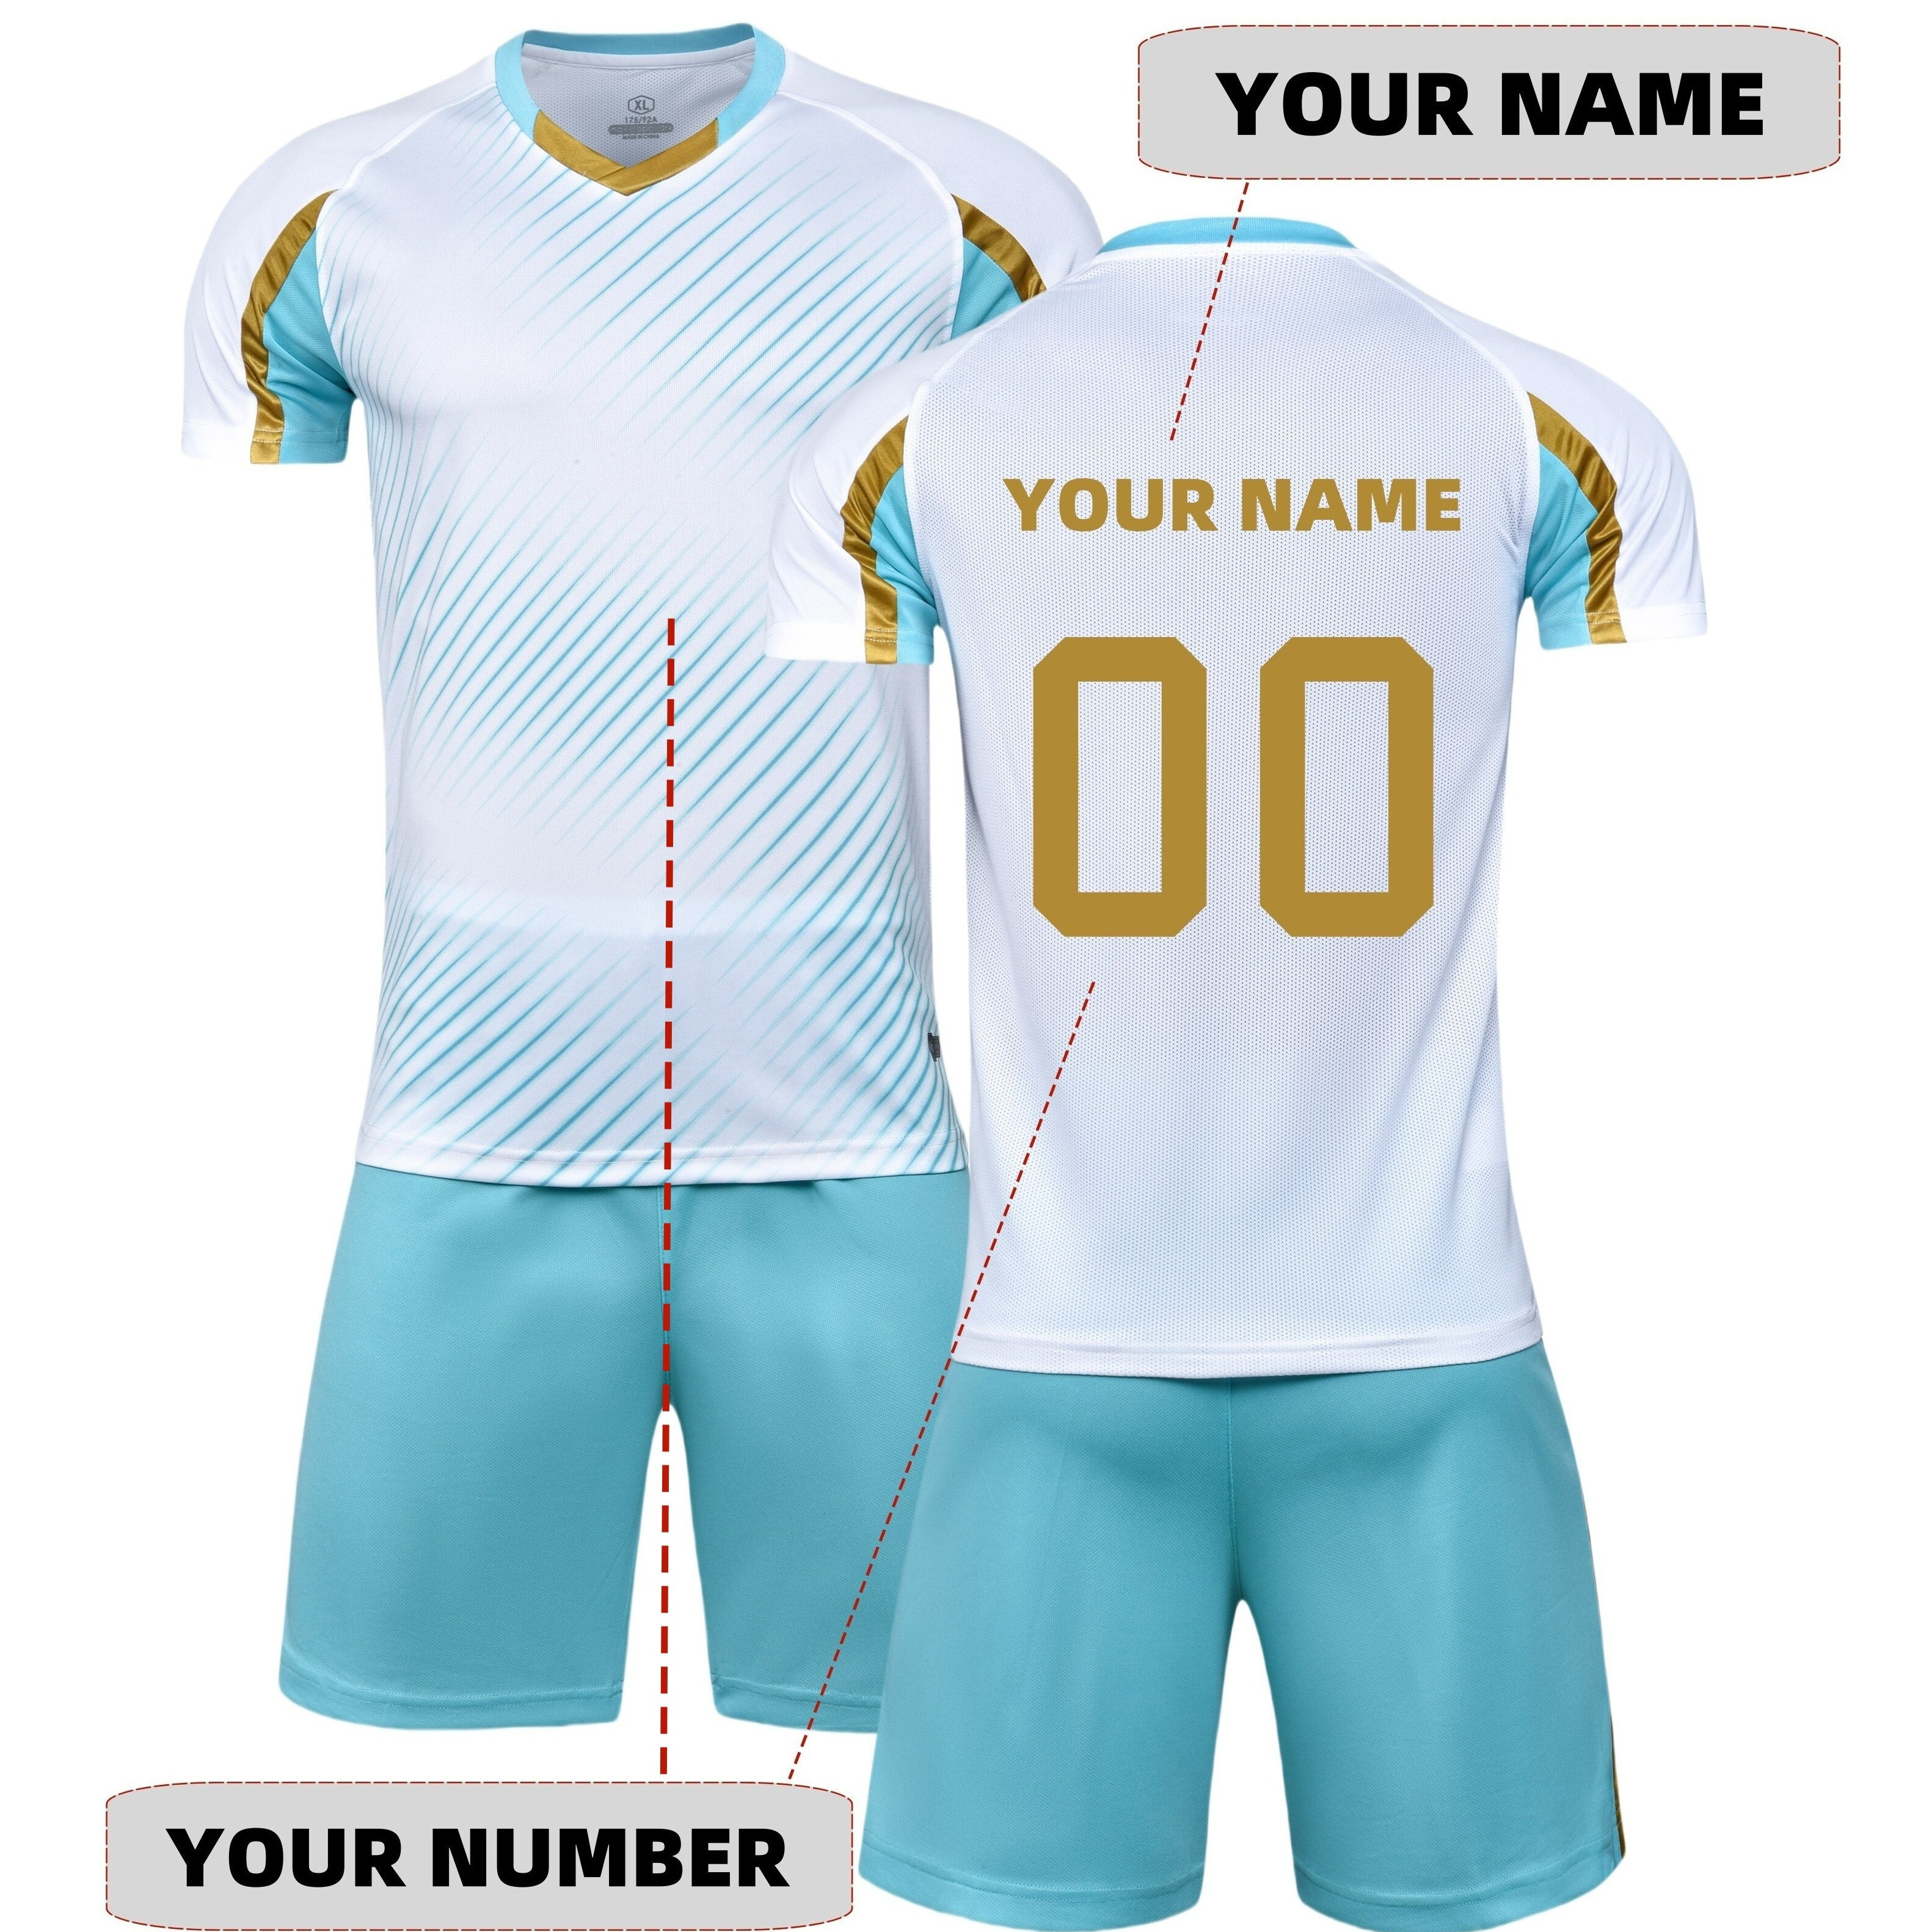 

Customized Name & Number, 2-piece Summer Soccer Training & Running Sportswear Set, Geometric Stripe Breathable Short Sleeve T-shirt And Quick-dry Shorts